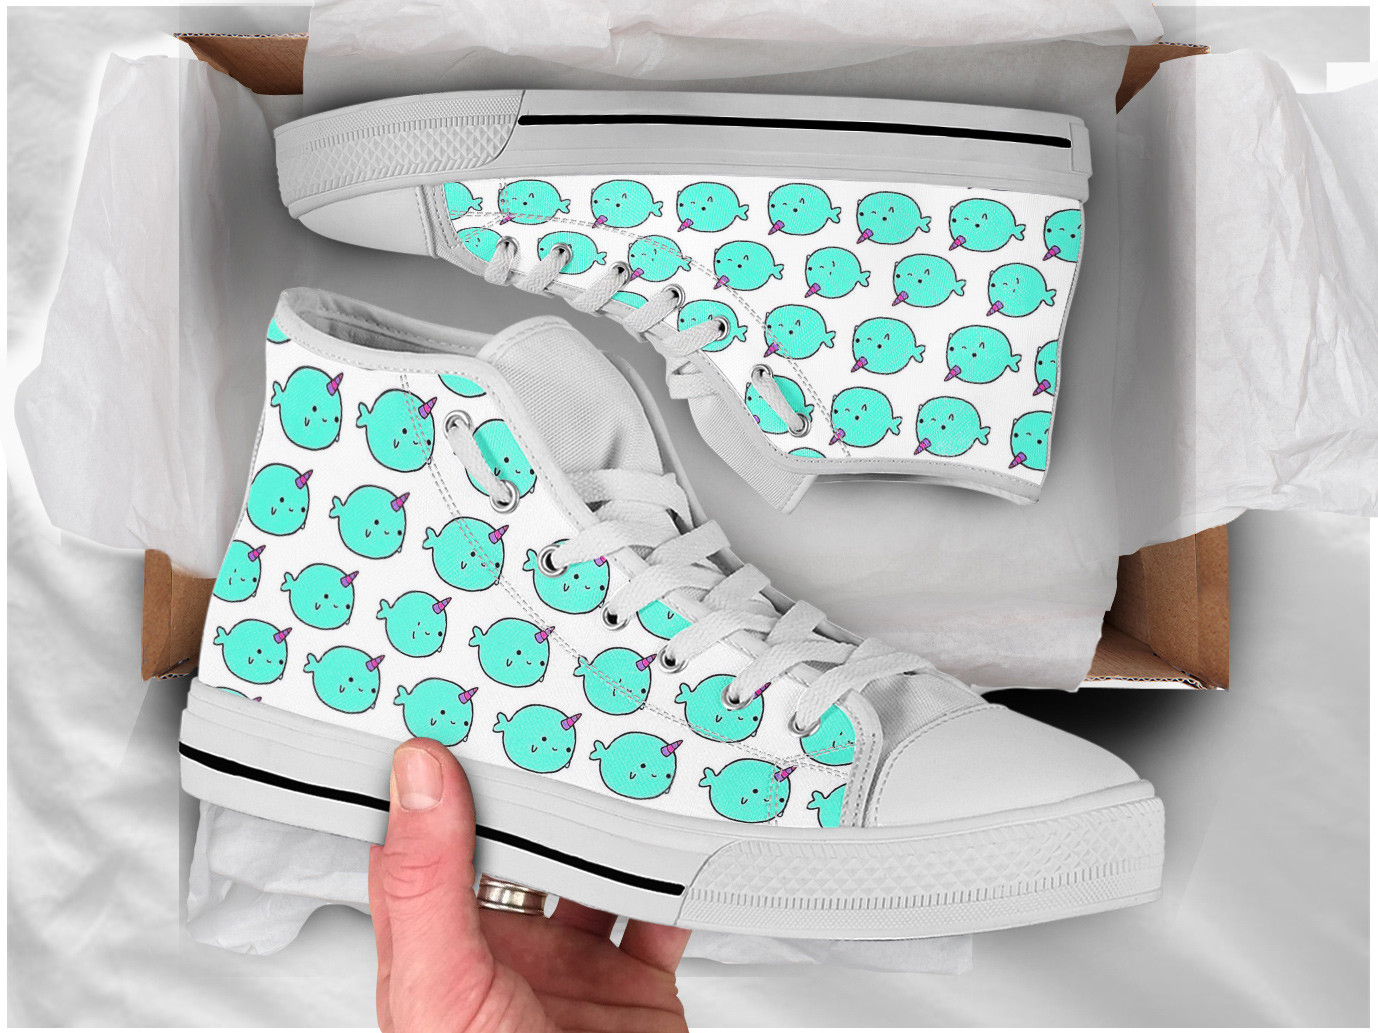 Cute Narwhal Shoes | Custom High Top Sneakers For Kids & Adults